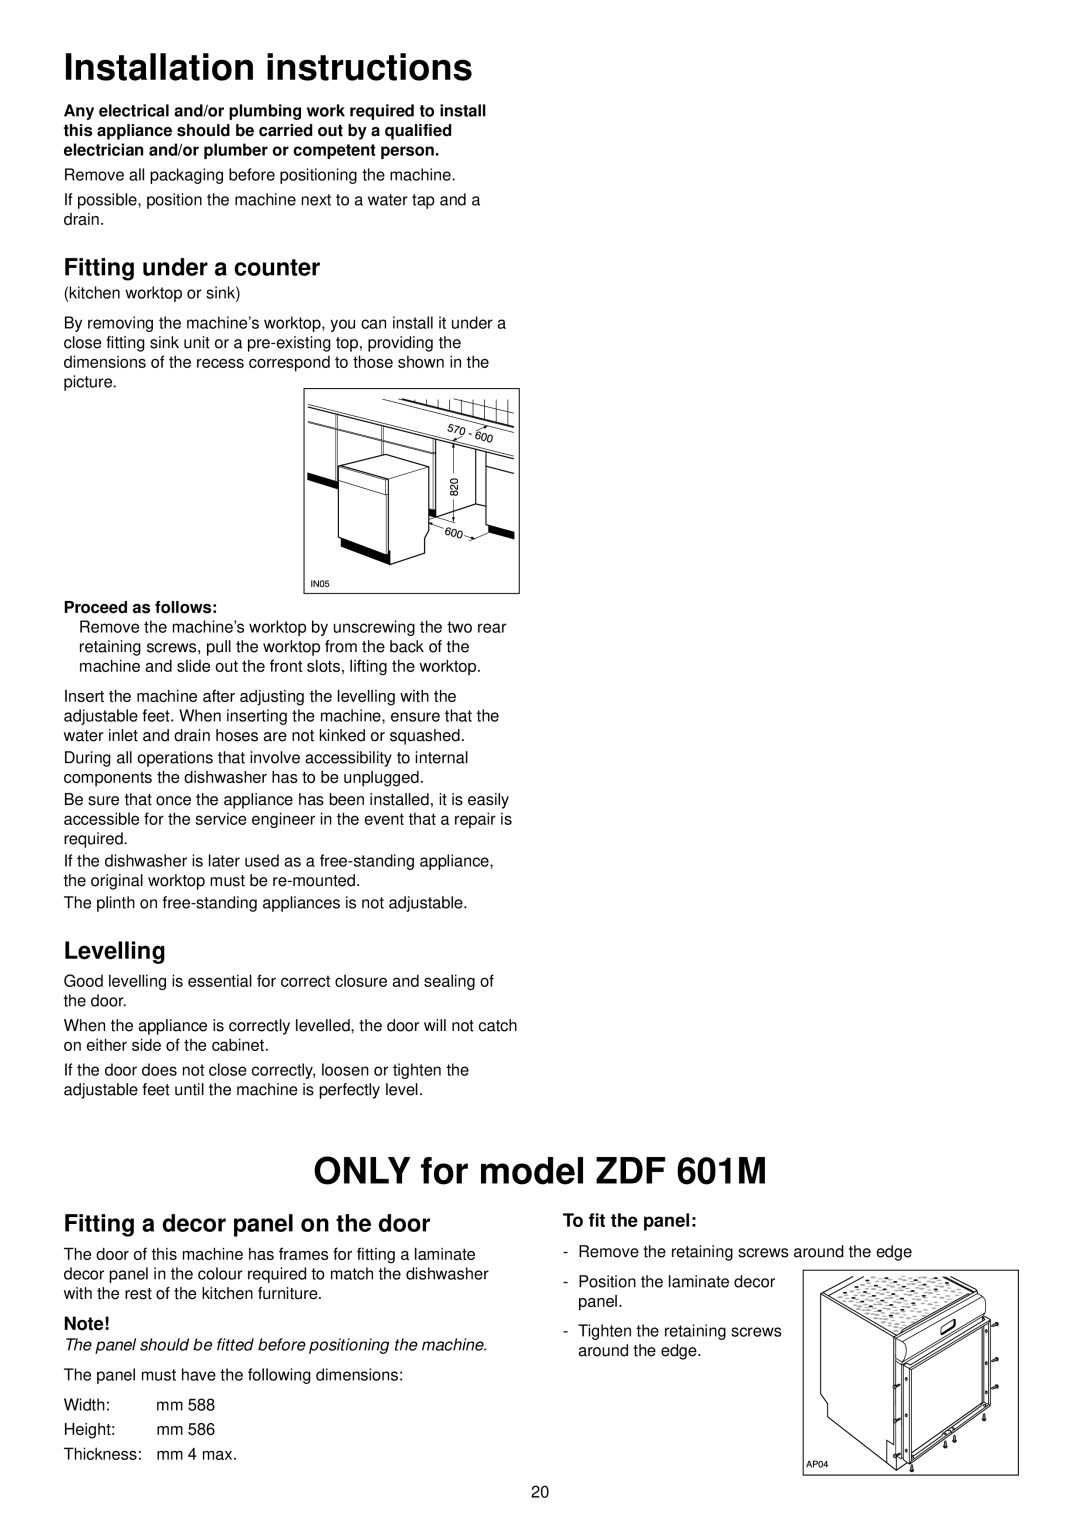 Zanussi manual Installation instructions, ONLY for model ZDF 601M, Fitting under a counter, Levelling, To fit the panel 